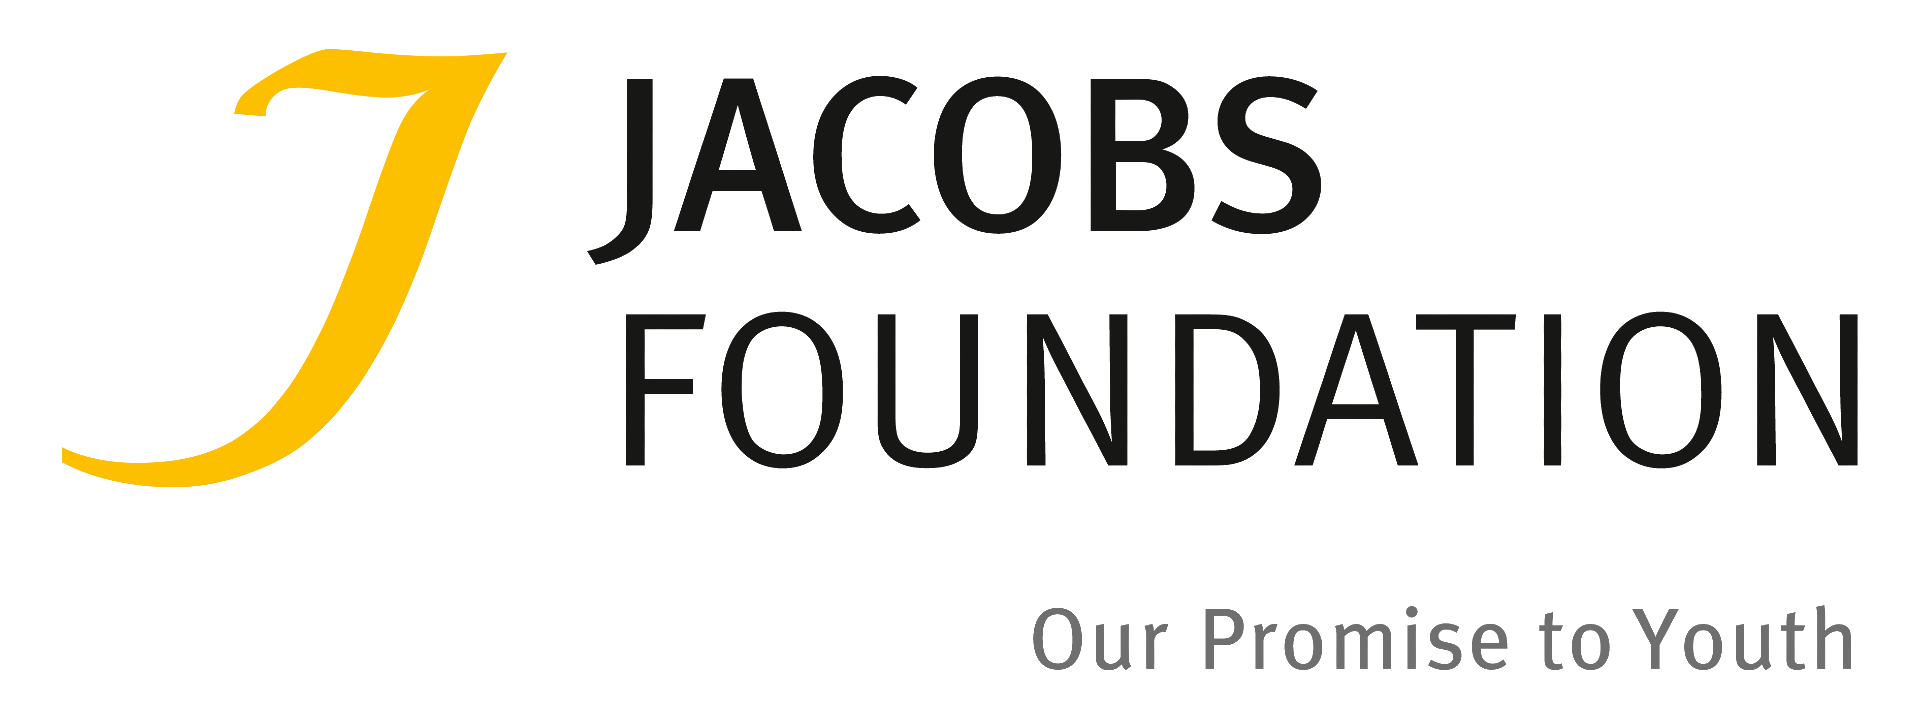 Jacobs Foundation